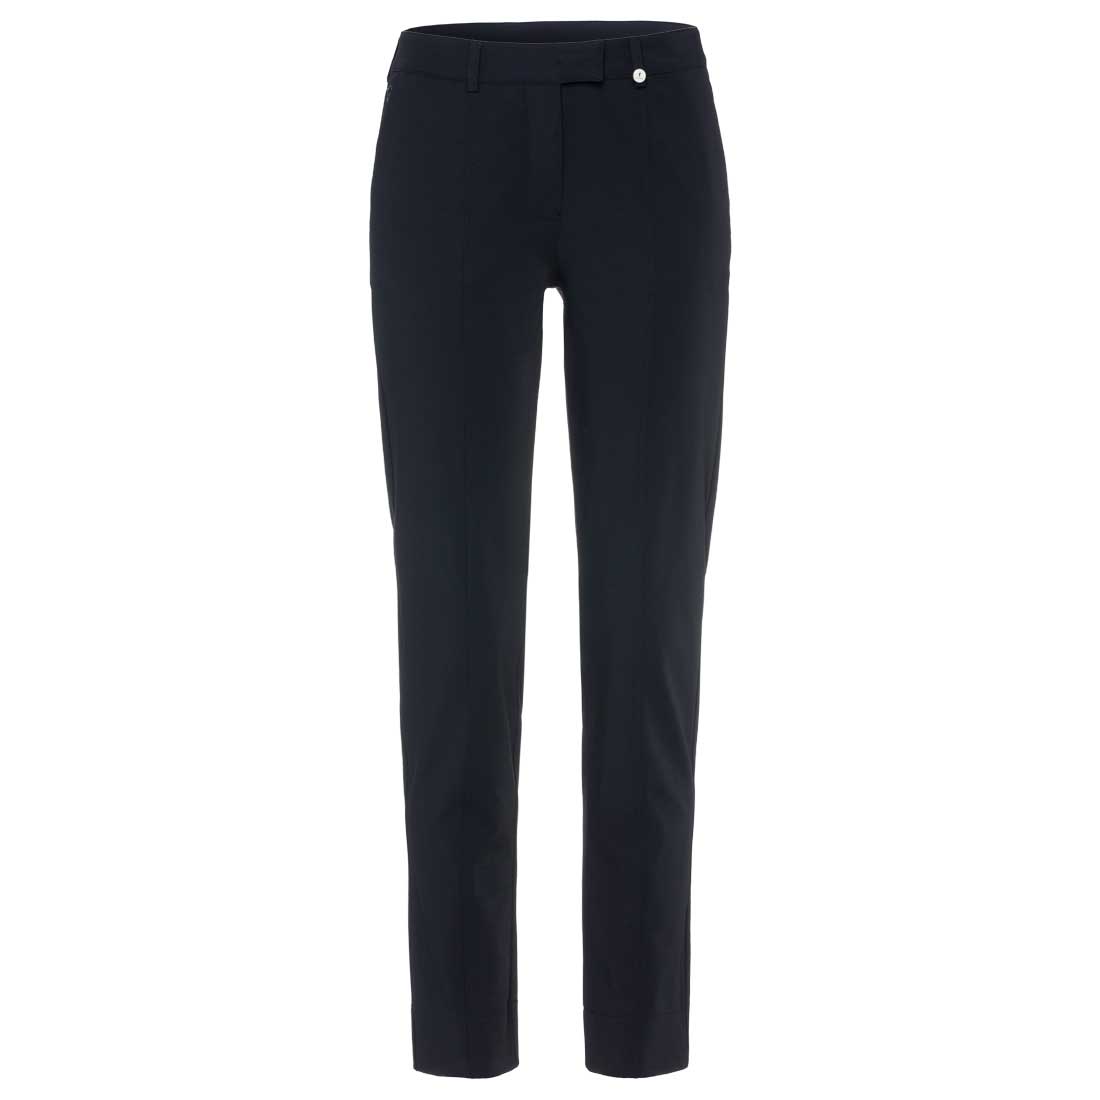 Ladies' stretch golf trousers made from finest cotton blend in slim fit